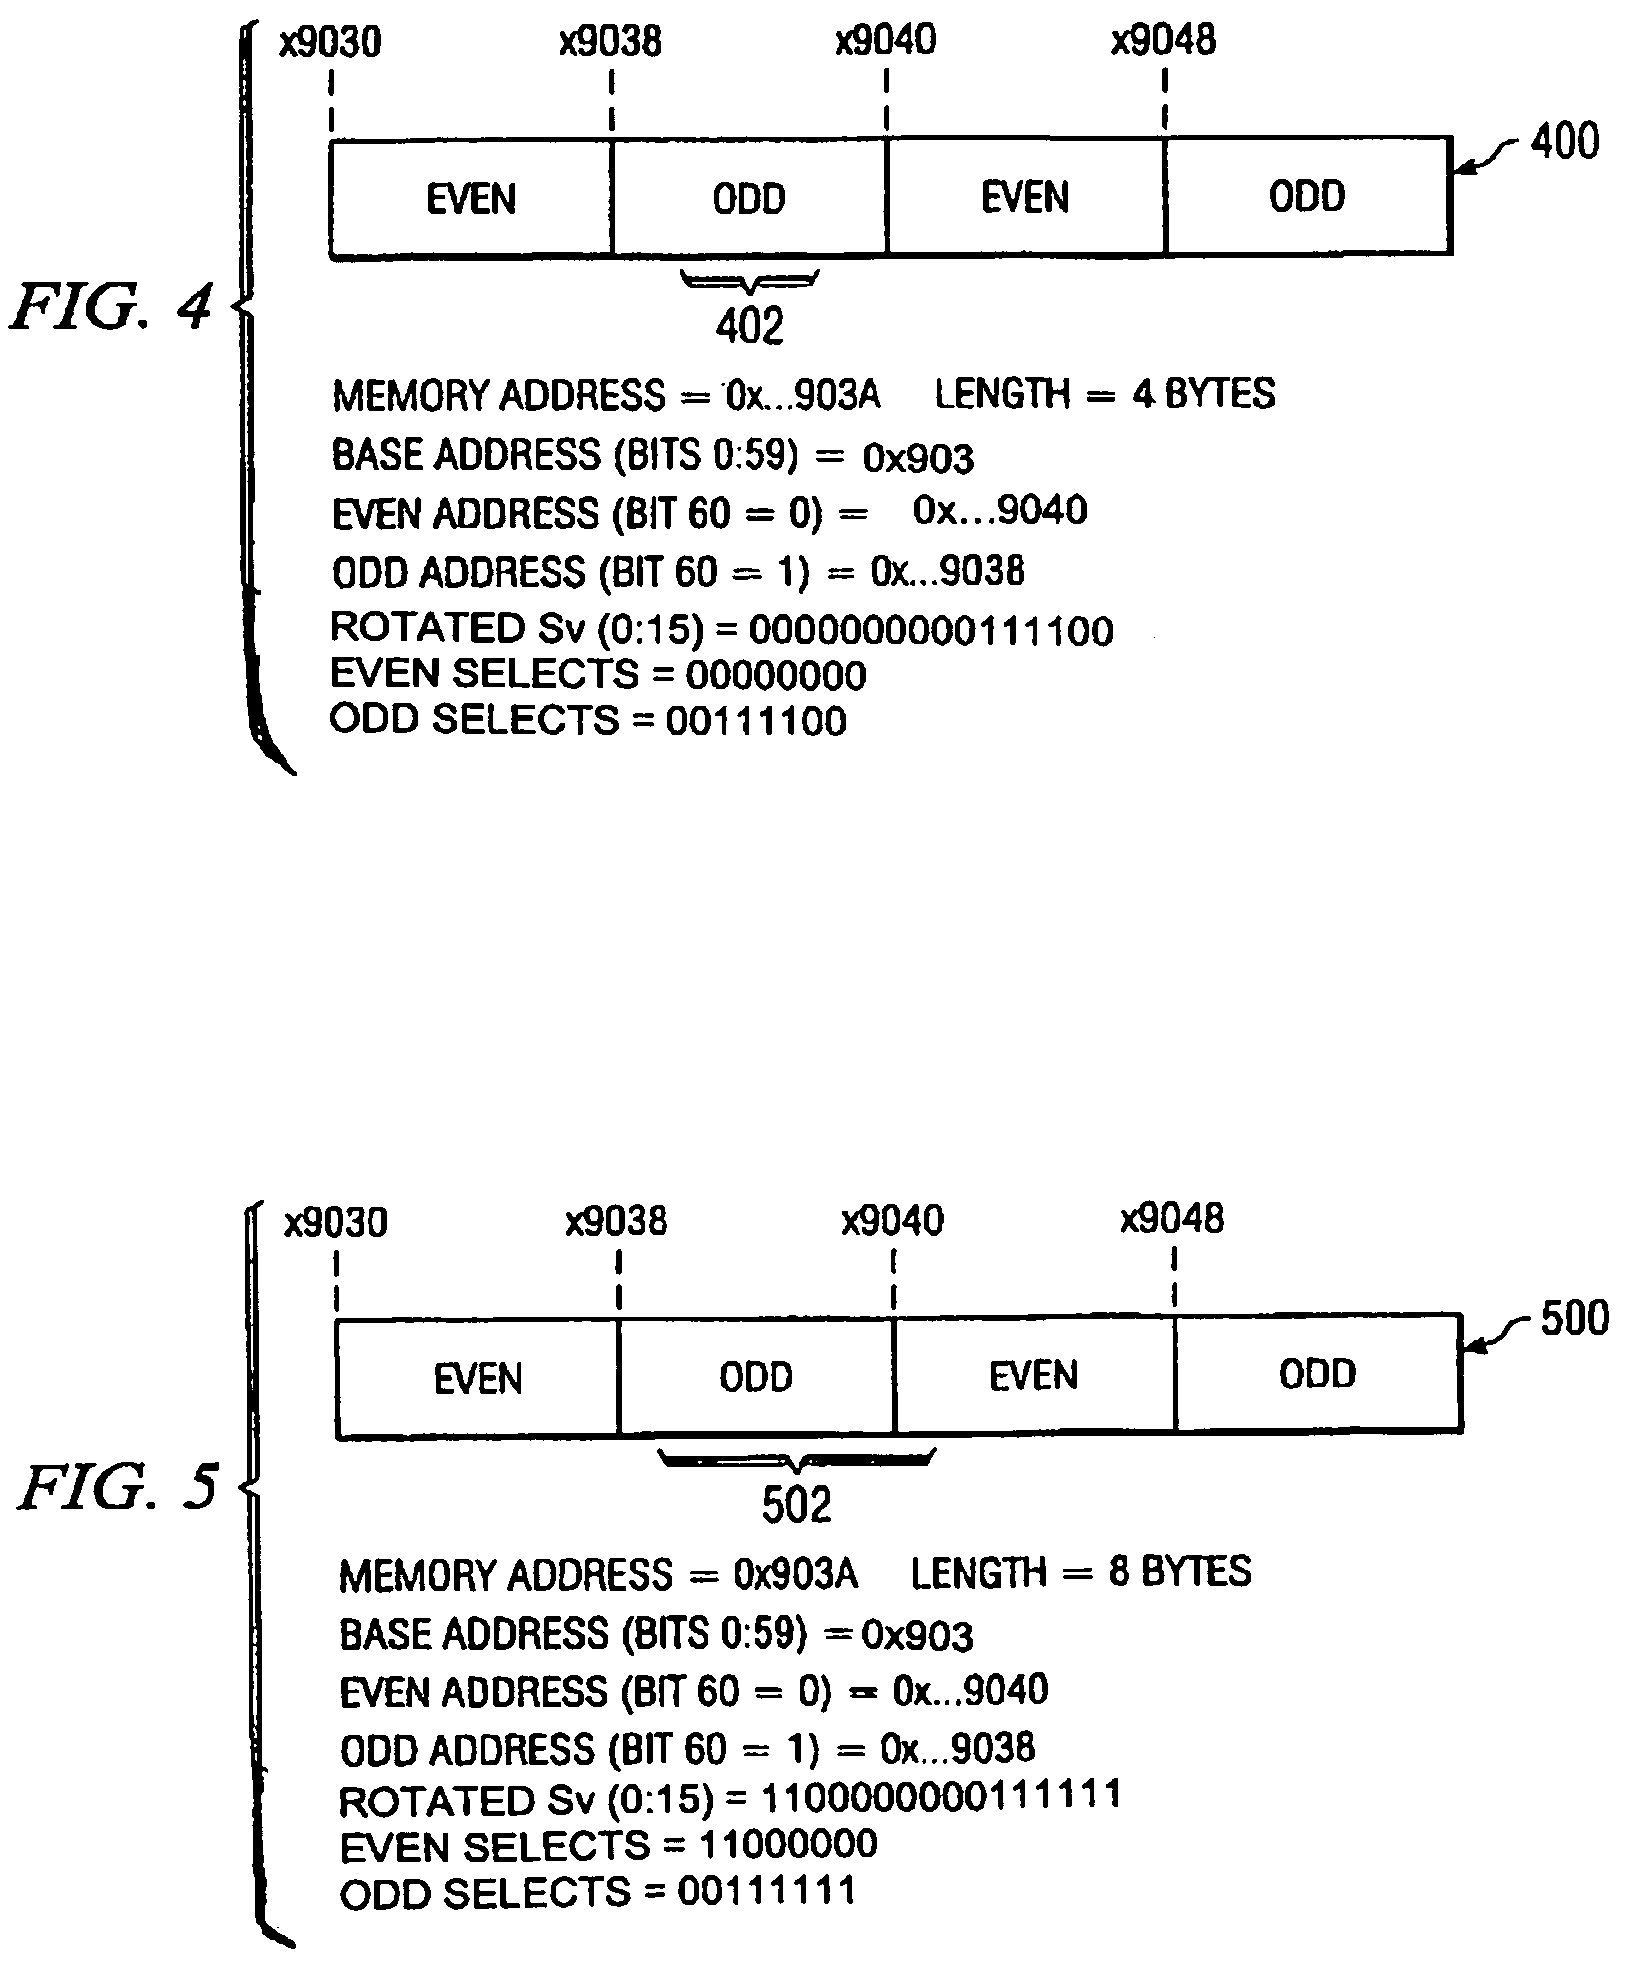 Method and apparatus for efficiently accessing both aligned and unaligned data from a memory